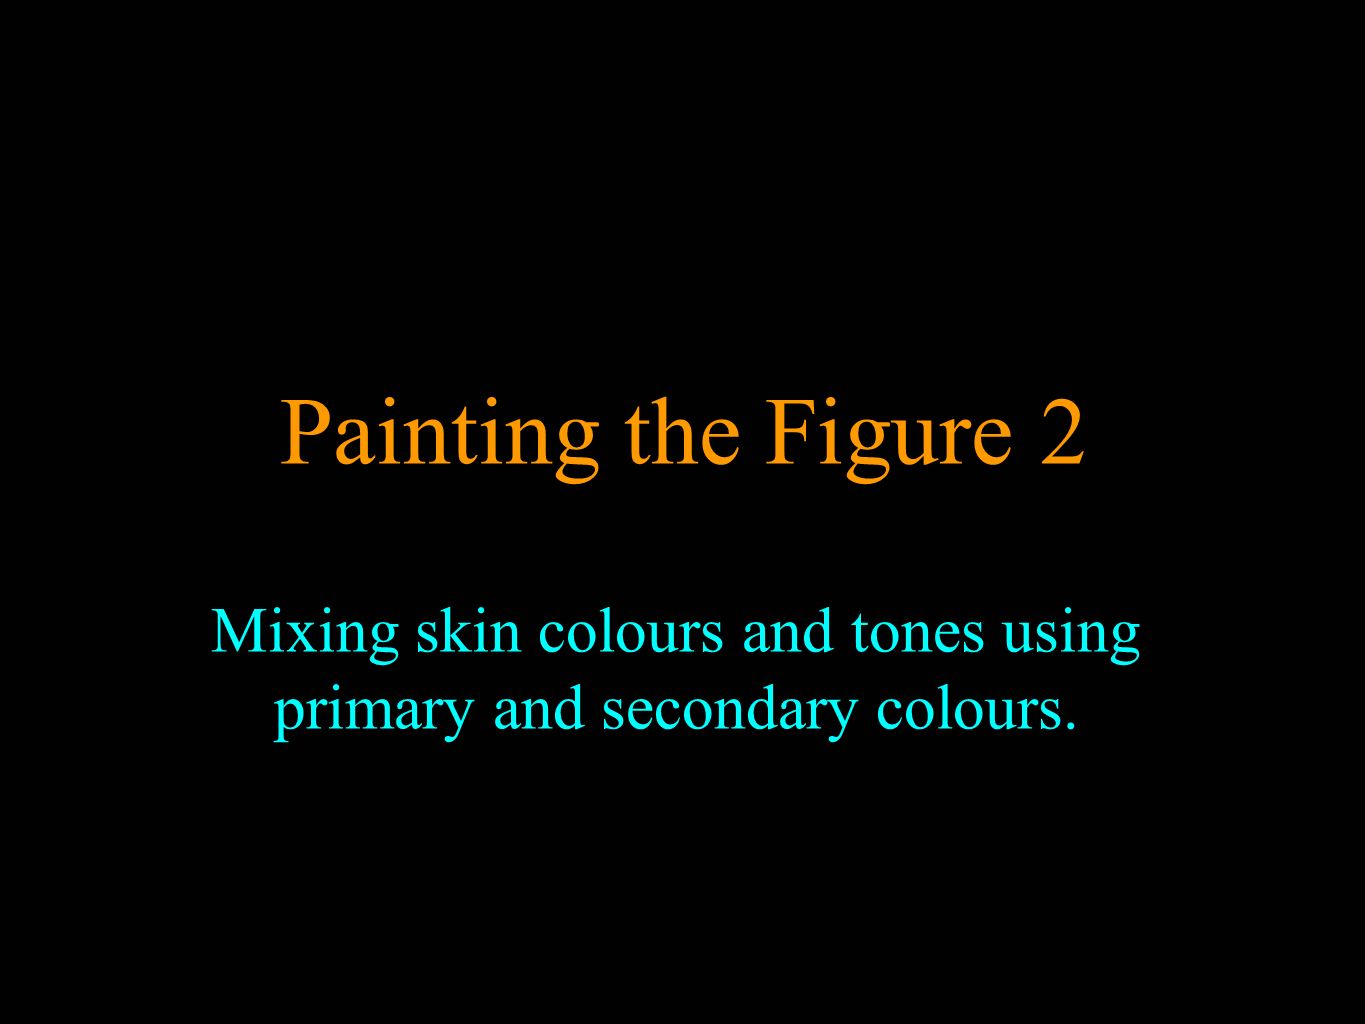 Mixing skin colours and tones using primary and secondary colours.